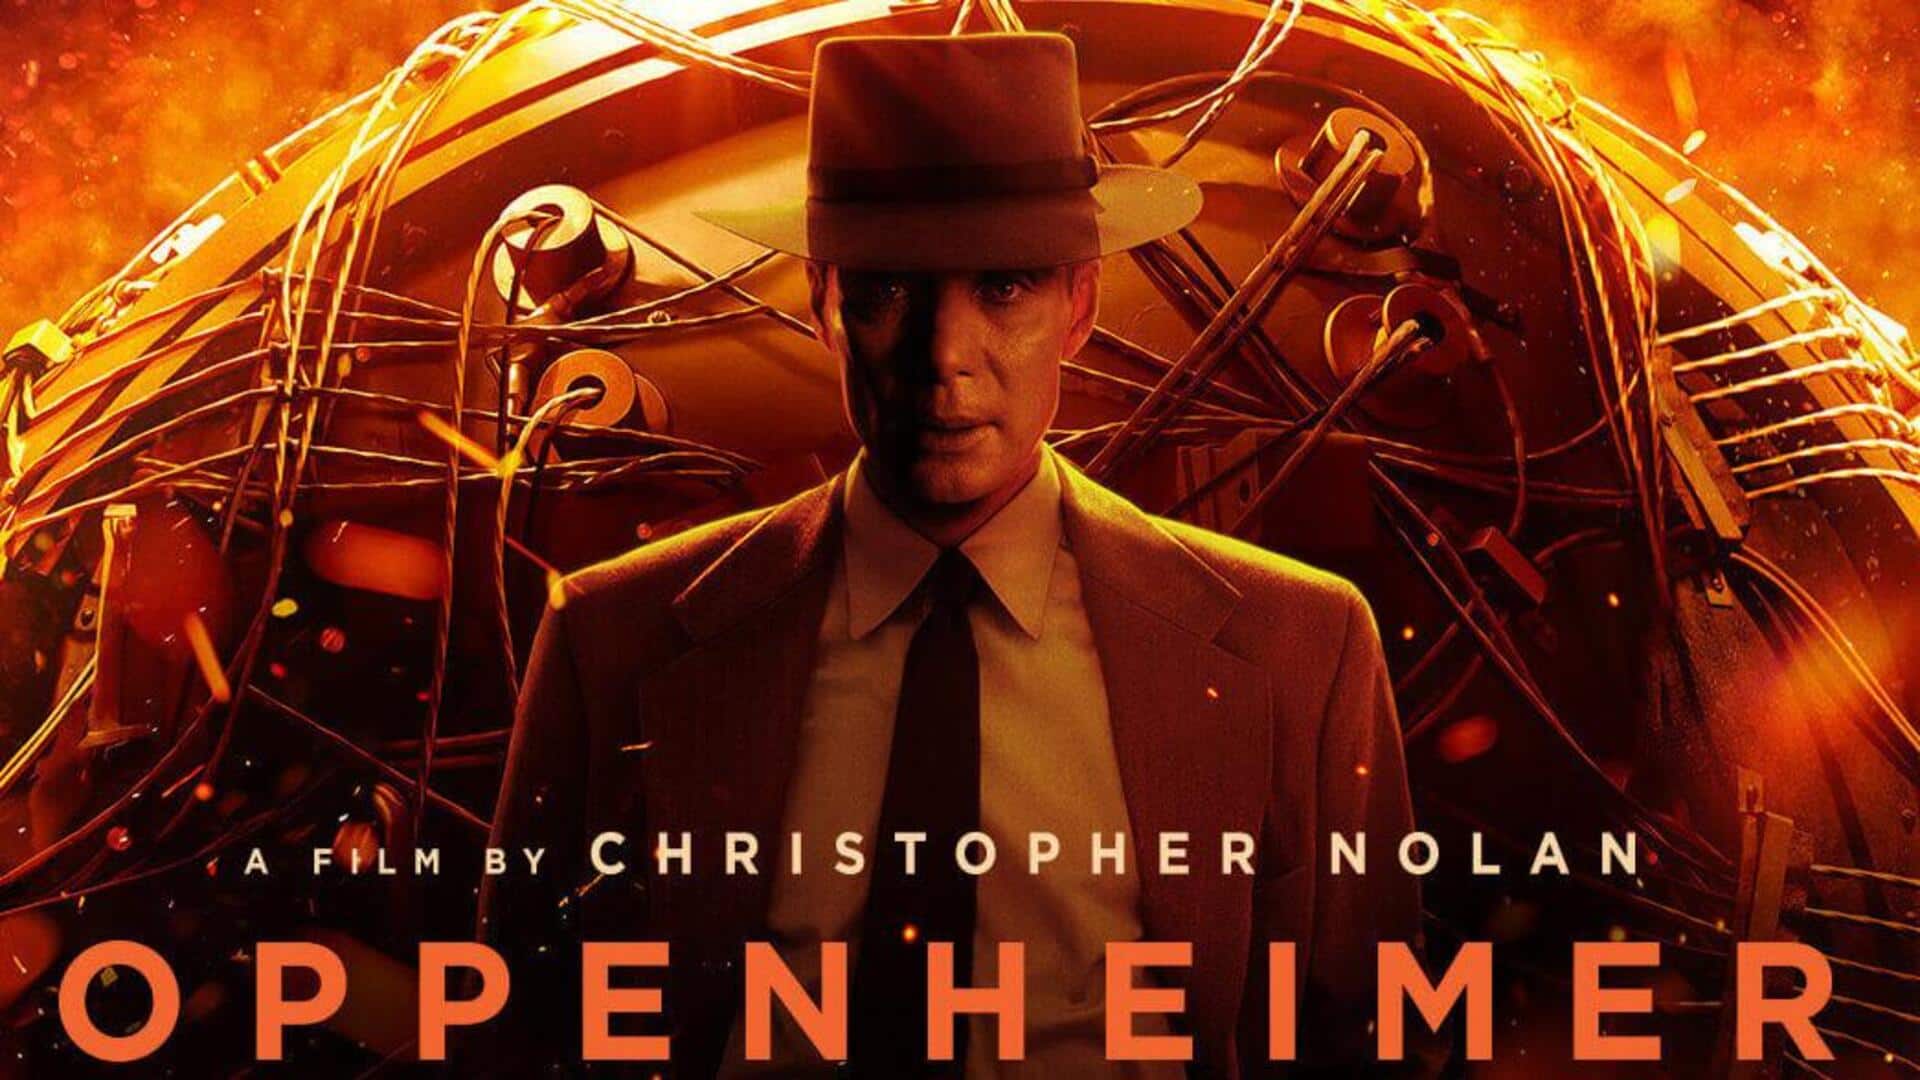 5 things to know before watching Christopher Nolan's 'Oppenheimer'